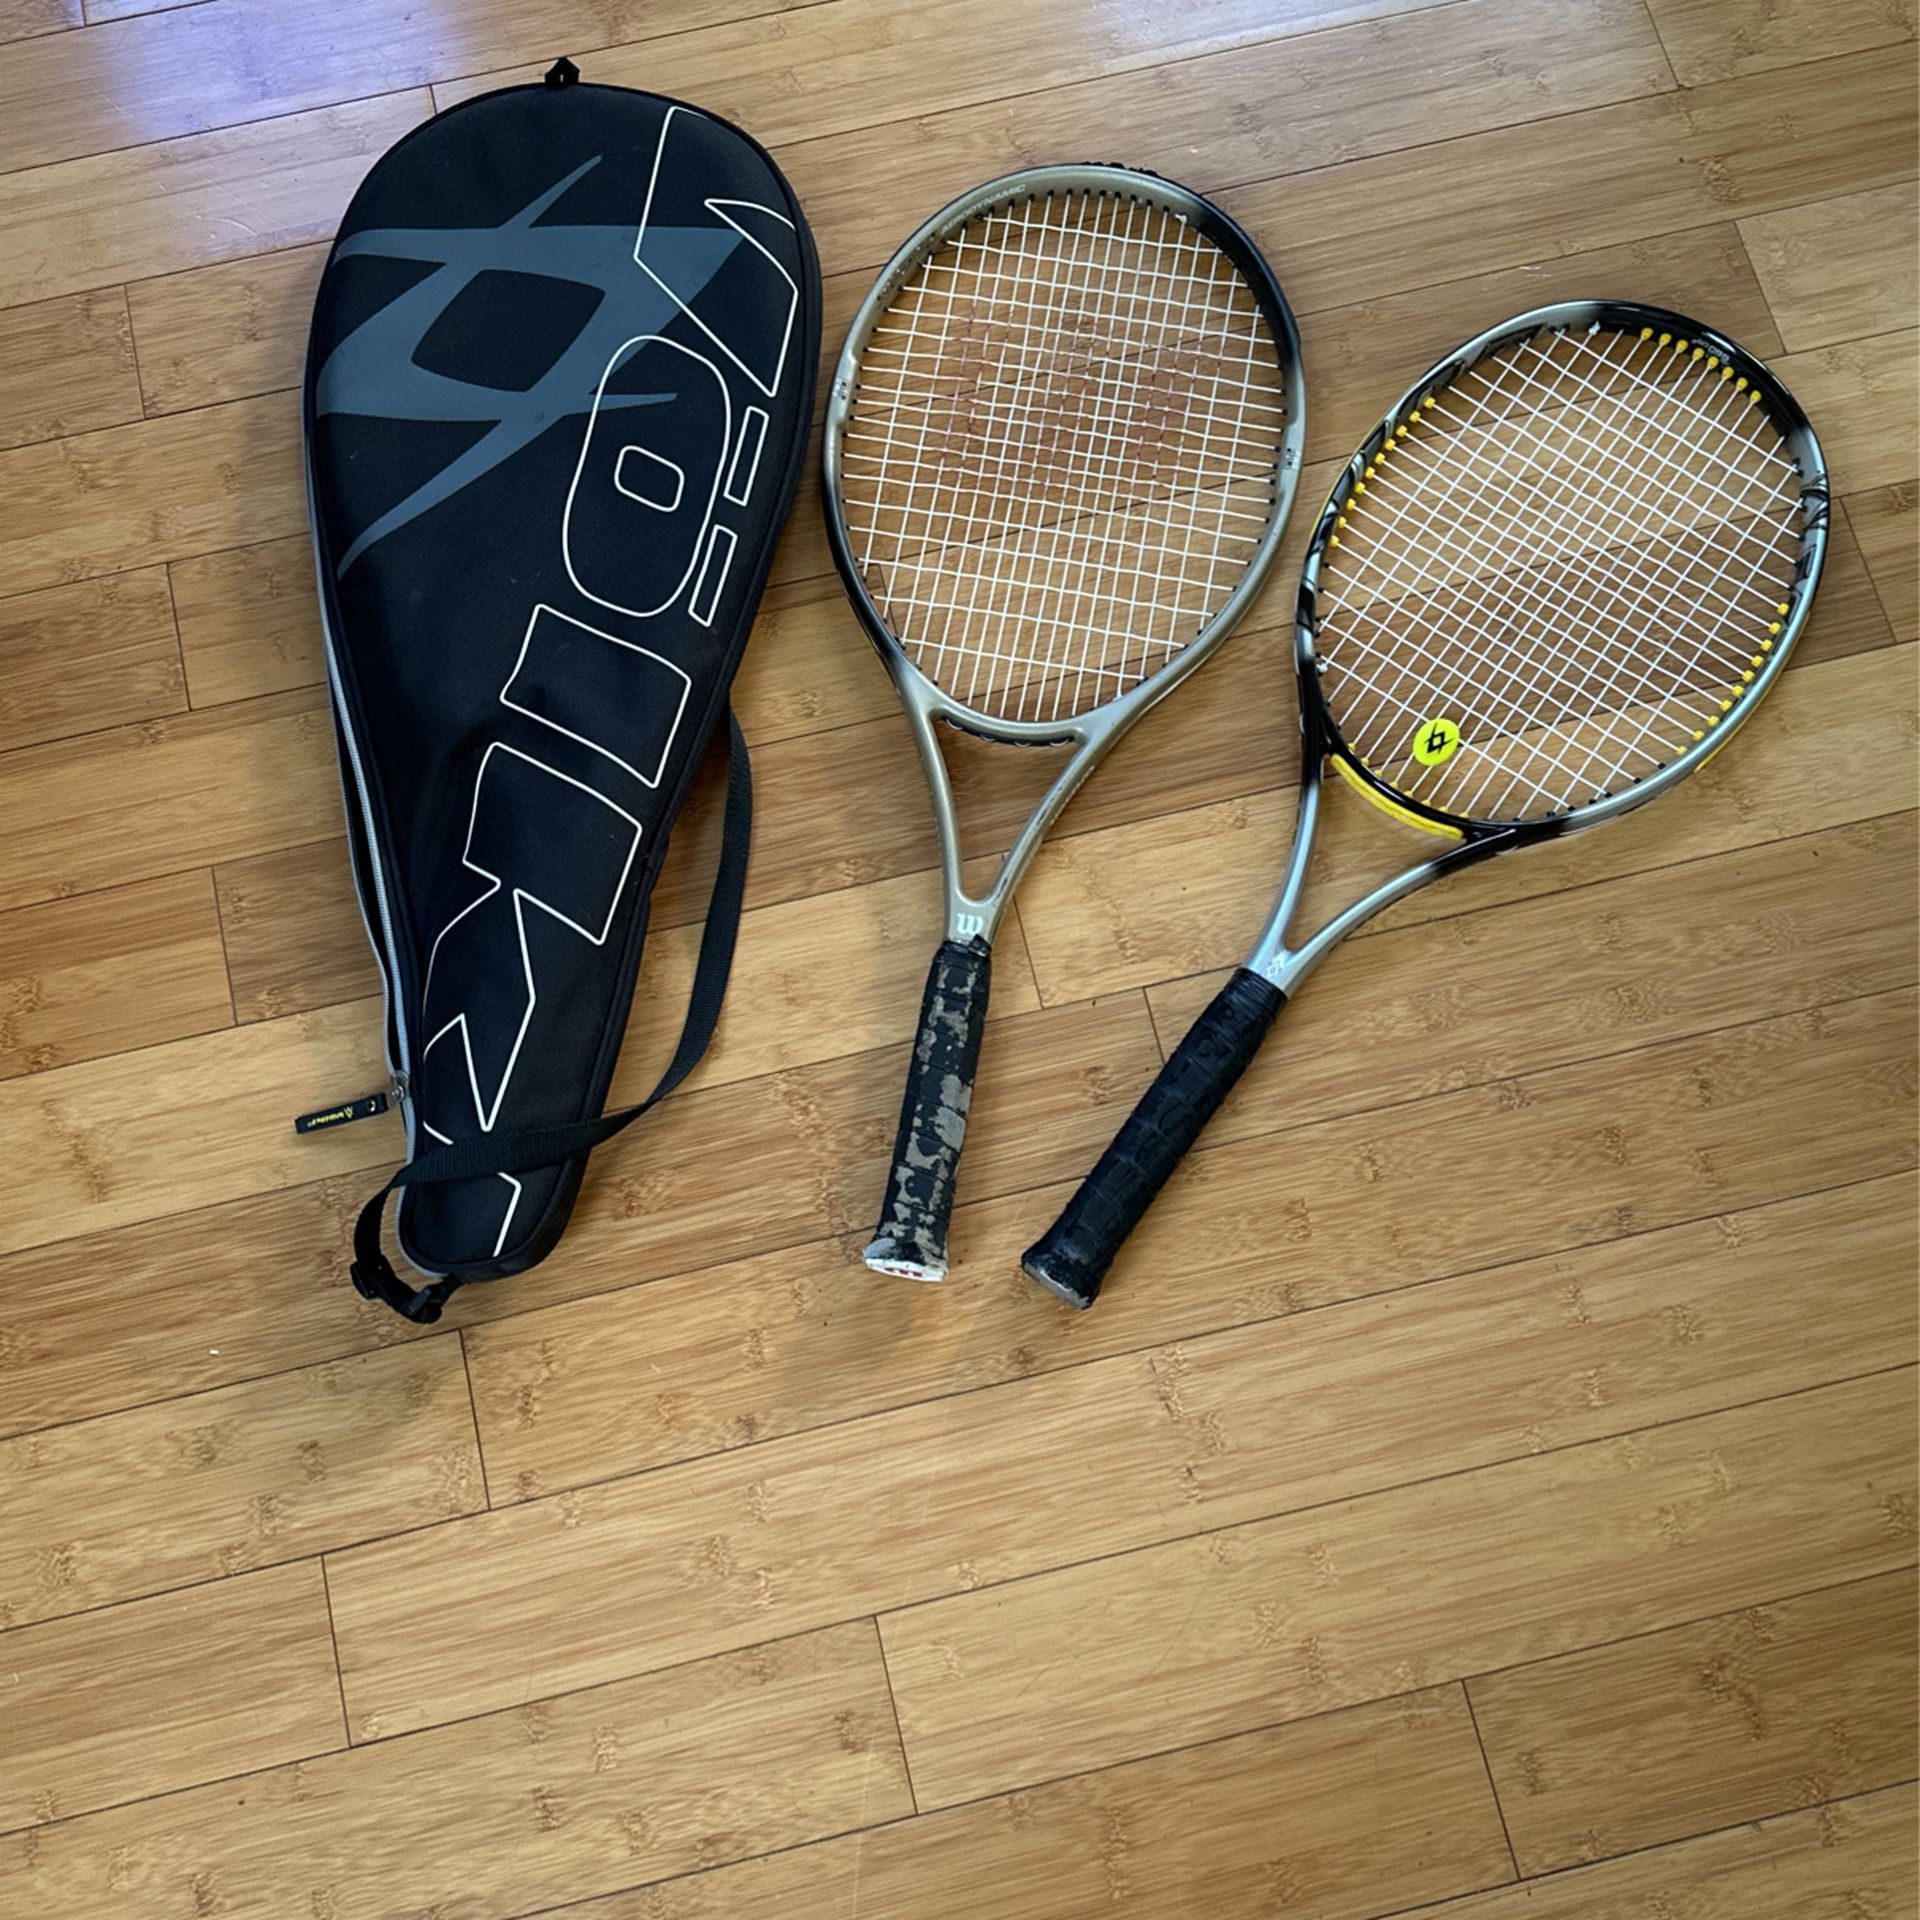 Tennis Rackets And Bag 